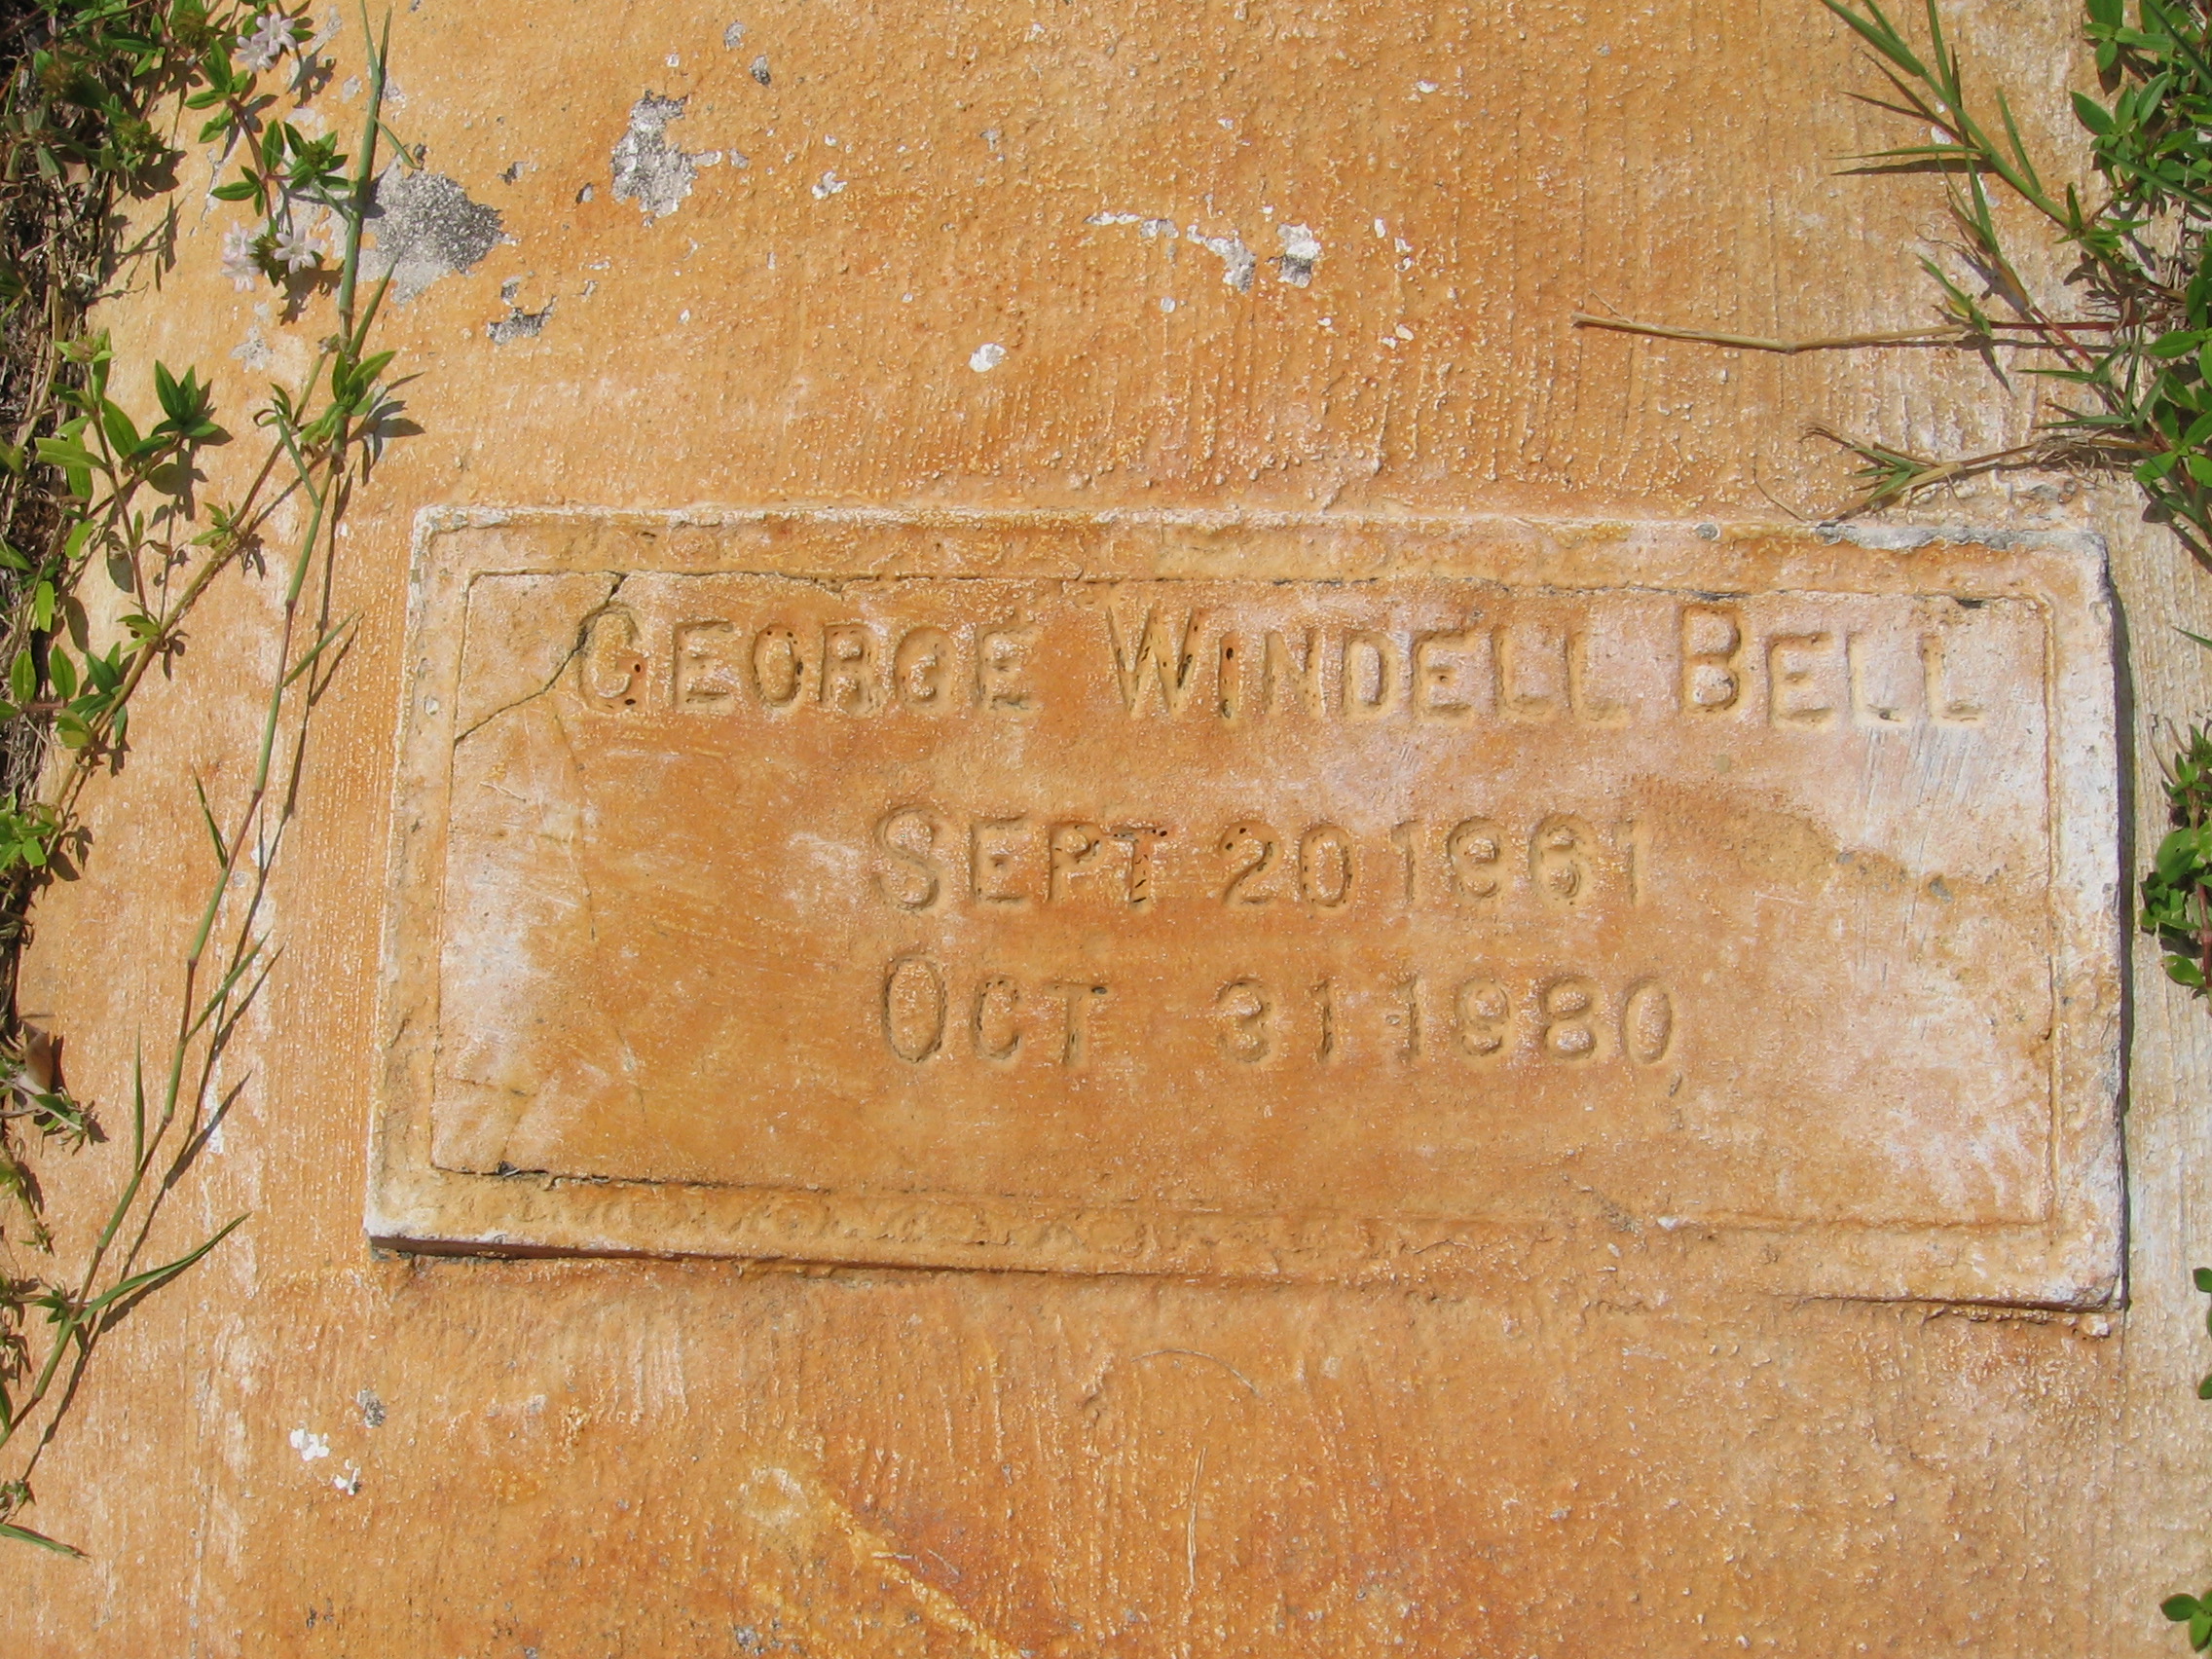 George Windell Bell